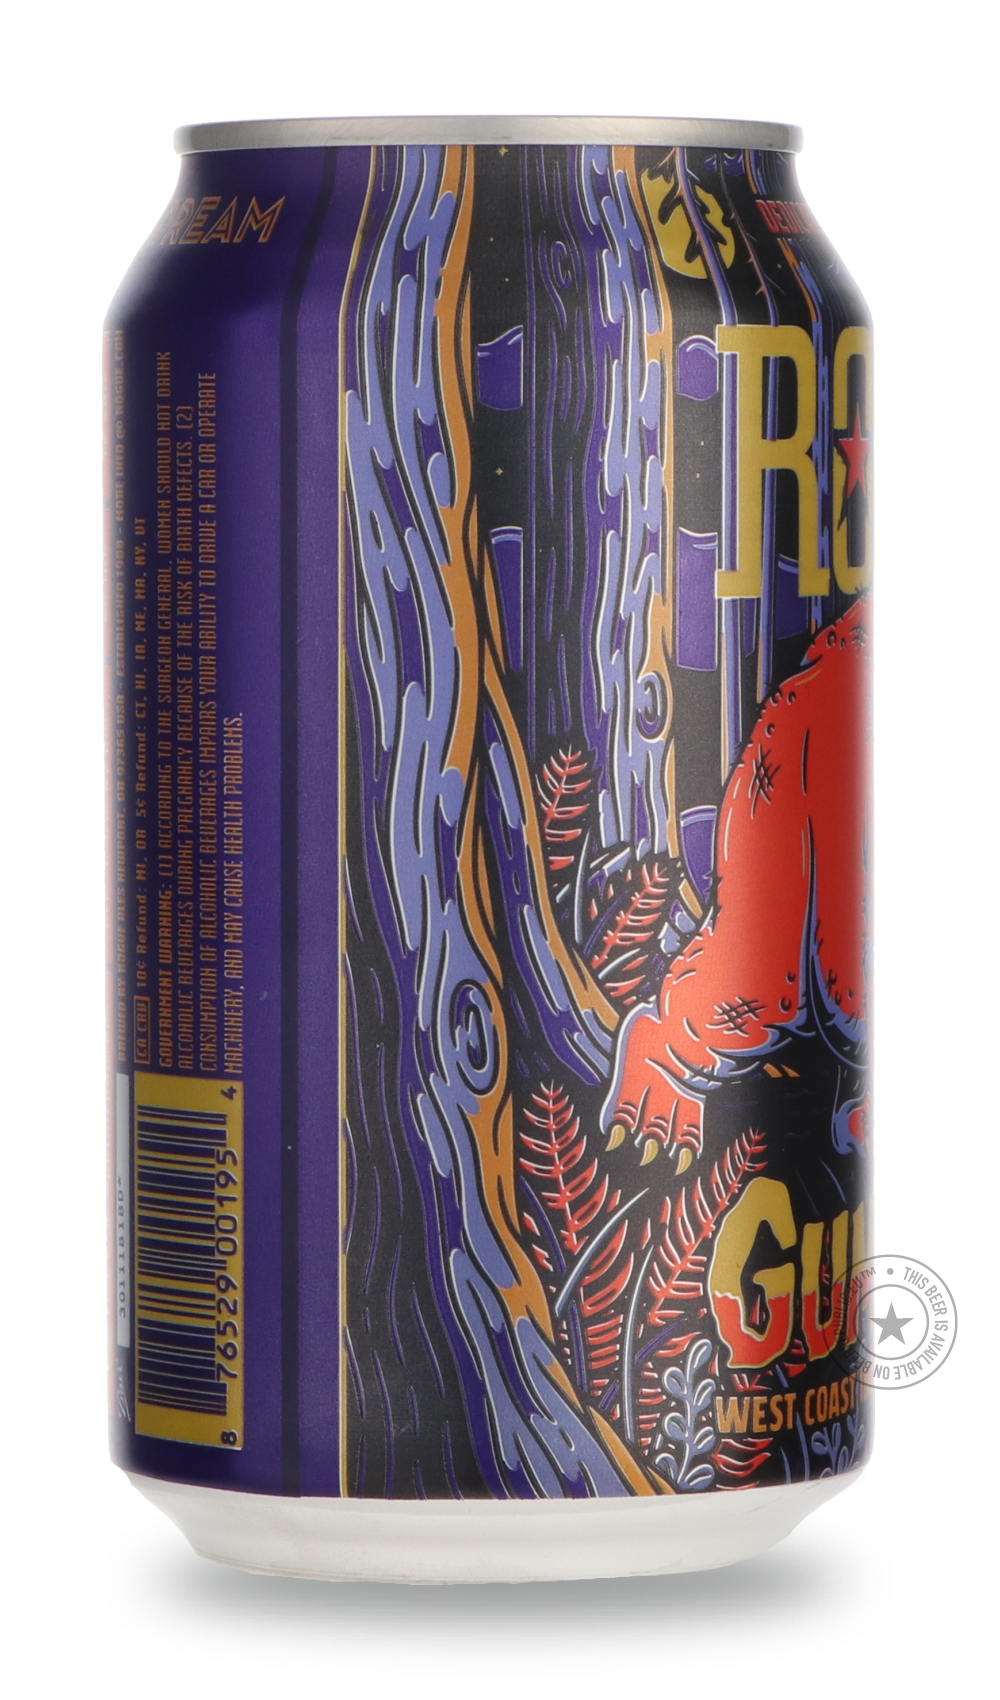 -Rogue- Gumberoo-IPA- Only @ Beer Republic - The best online beer store for American & Canadian craft beer - Buy beer online from the USA and Canada - Bier online kopen - Amerikaans bier kopen - Craft beer store - Craft beer kopen - Amerikanisch bier kaufen - Bier online kaufen - Acheter biere online - IPA - Stout - Porter - New England IPA - Hazy IPA - Imperial Stout - Barrel Aged - Barrel Aged Imperial Stout - Brown - Dark beer - Blond - Blonde - Pilsner - Lager - Wheat - Weizen - Amber - Barley Wine - Qu